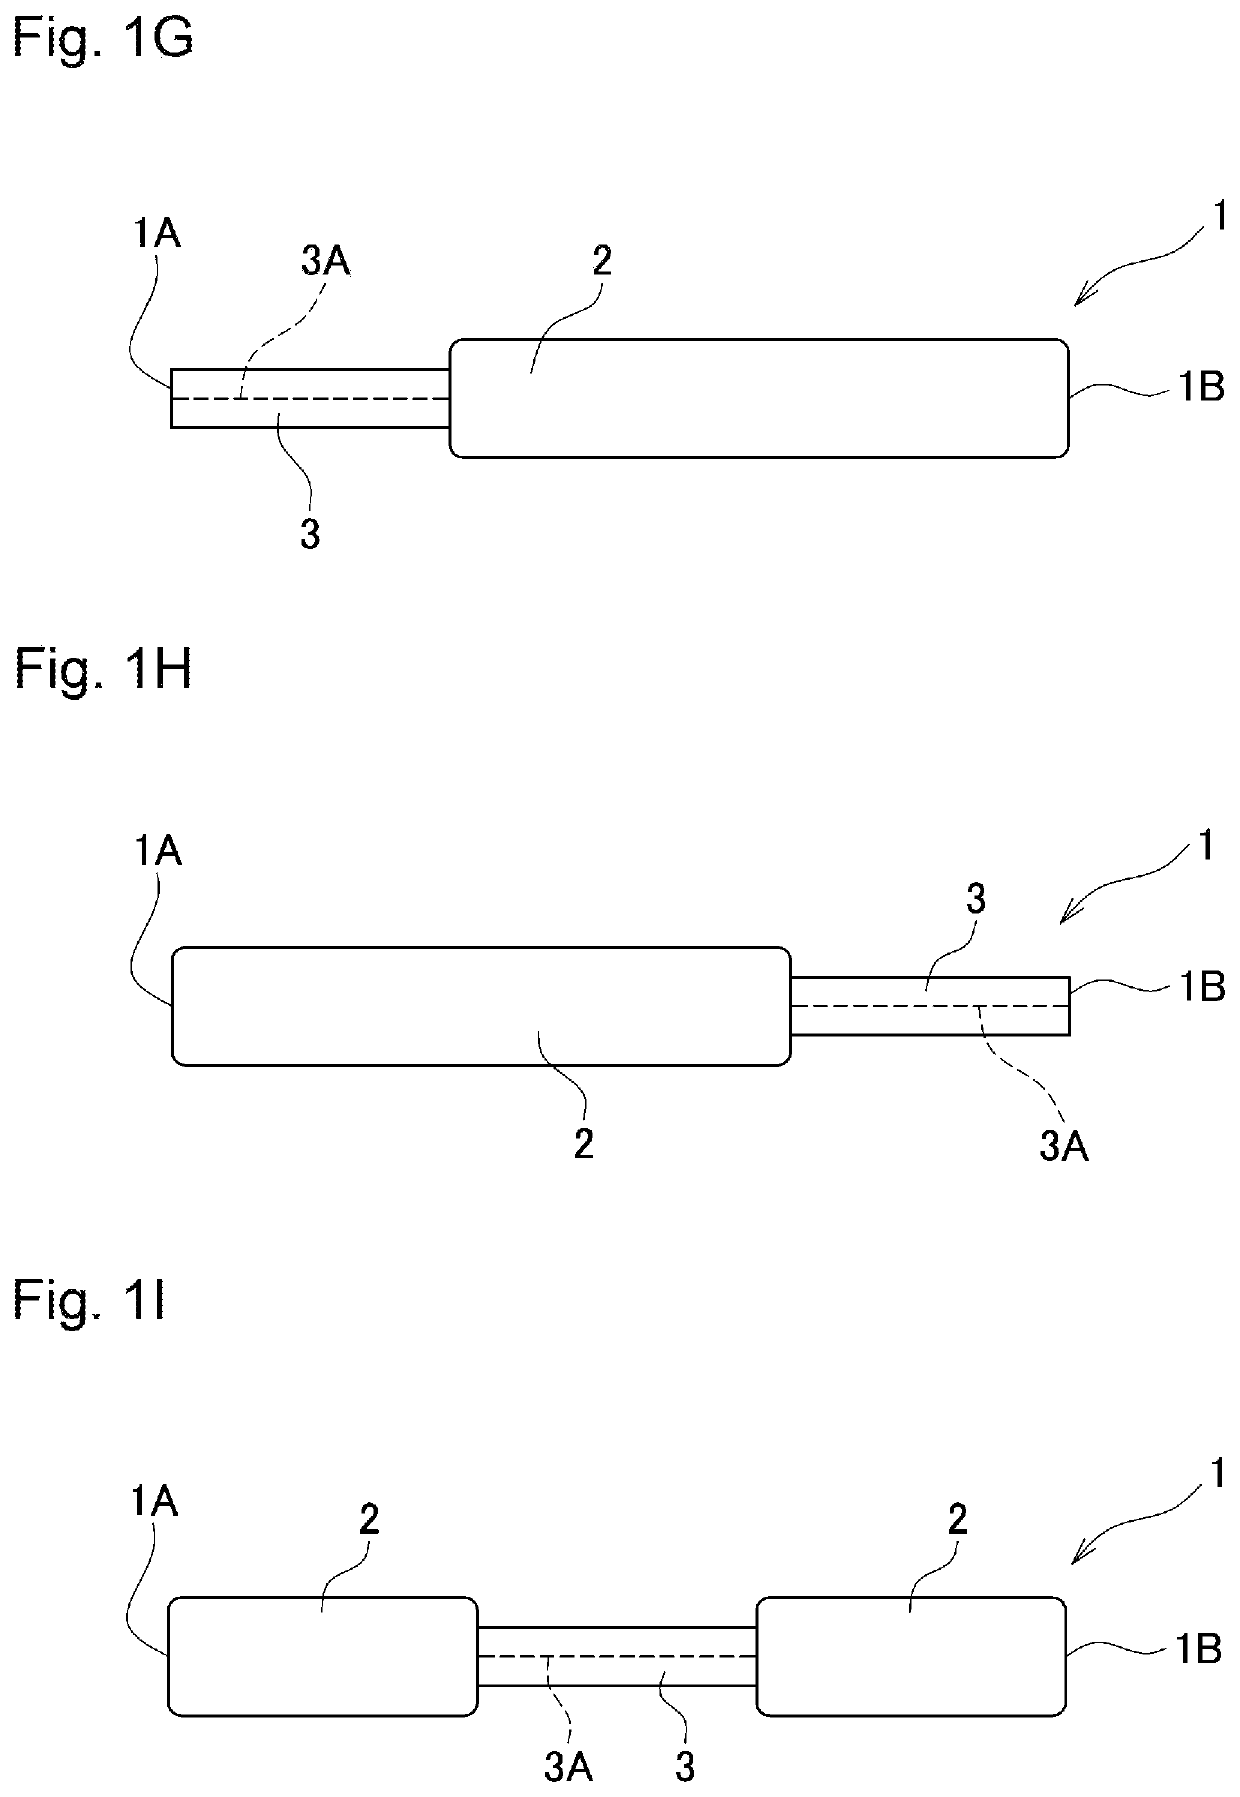 Adhesive plaster structure for treating wounds caused by ingrown nails